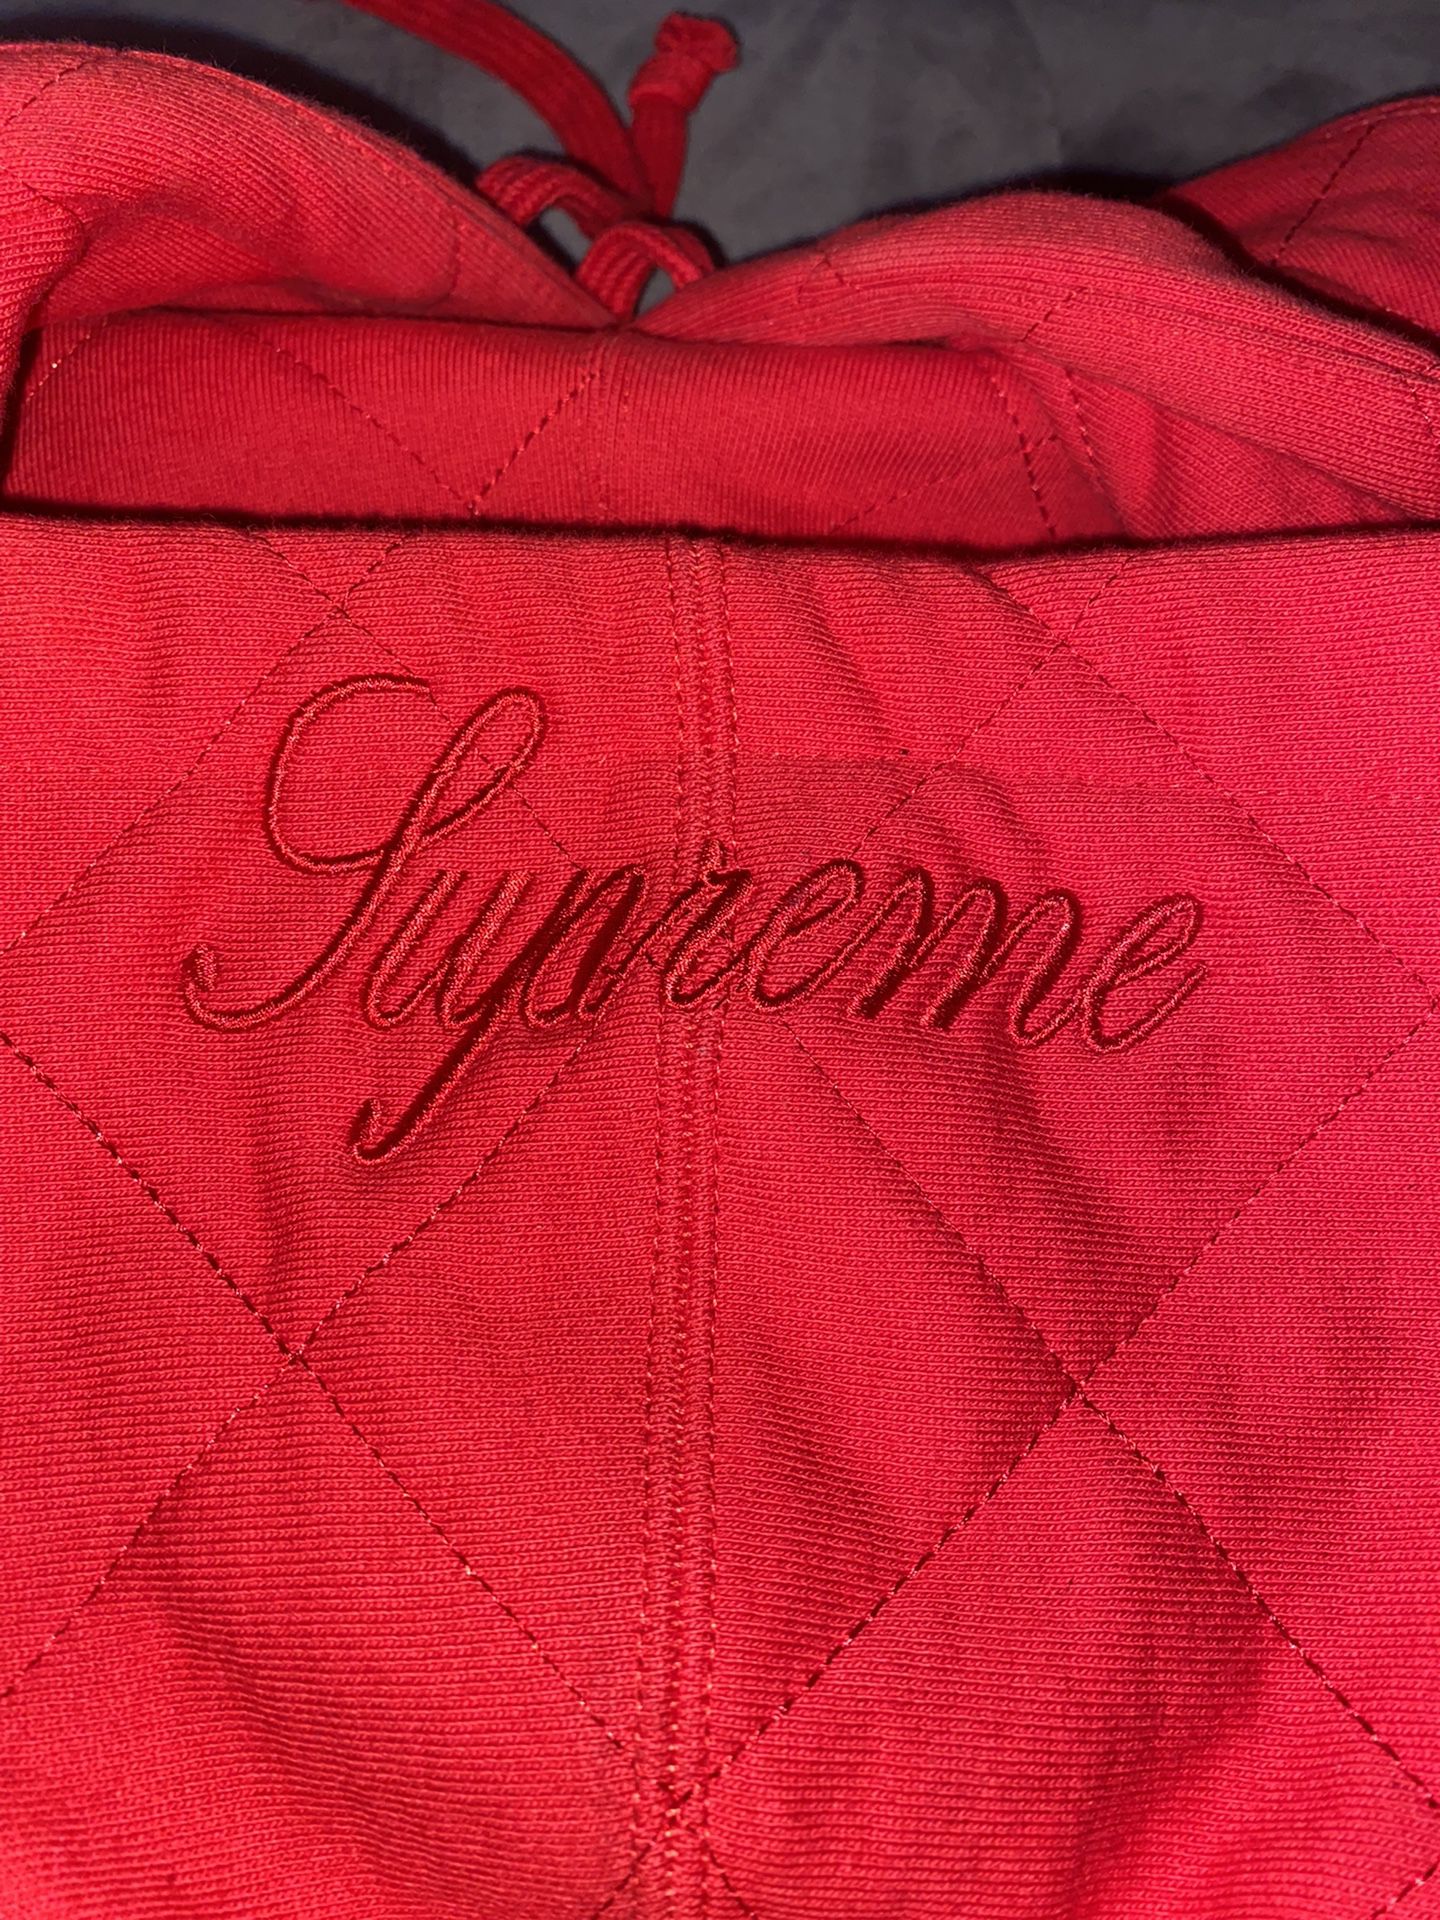 Supreme red quilted hoodie size M